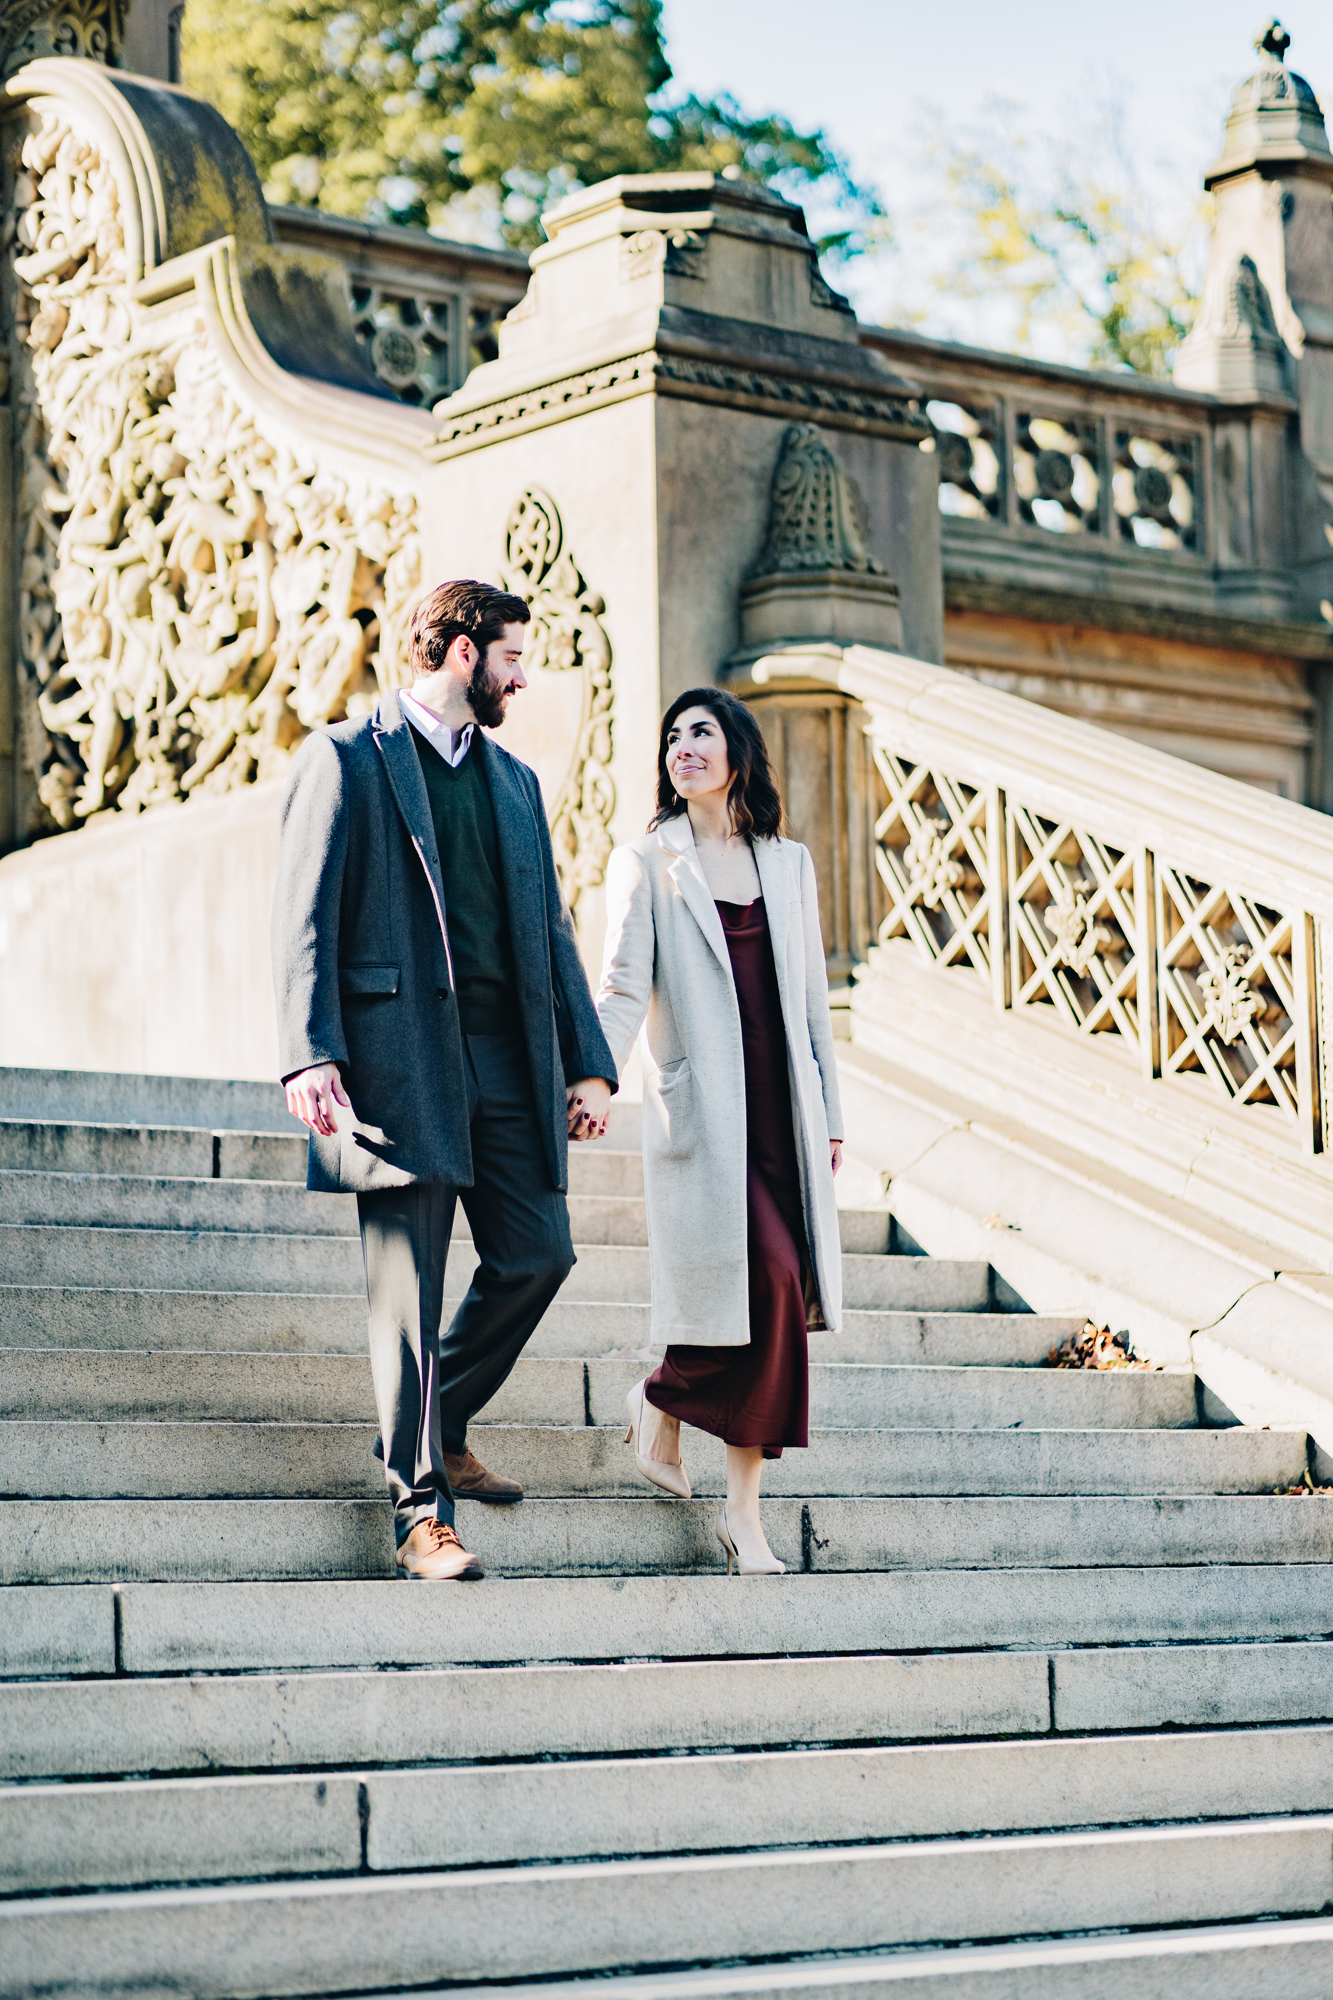 Stylish Central Park Engagement Photos in Fall